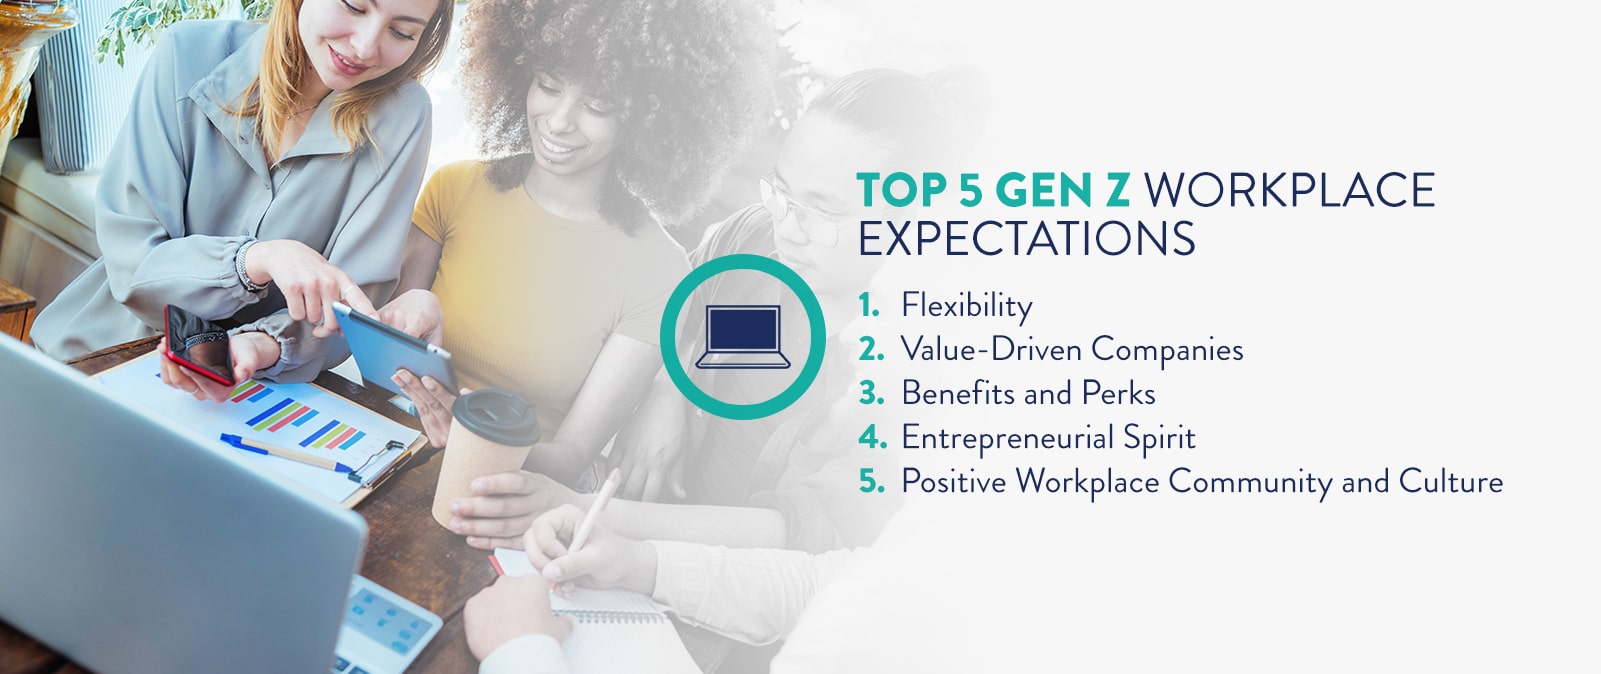 Top 5 Gen Z Workplace Expectations